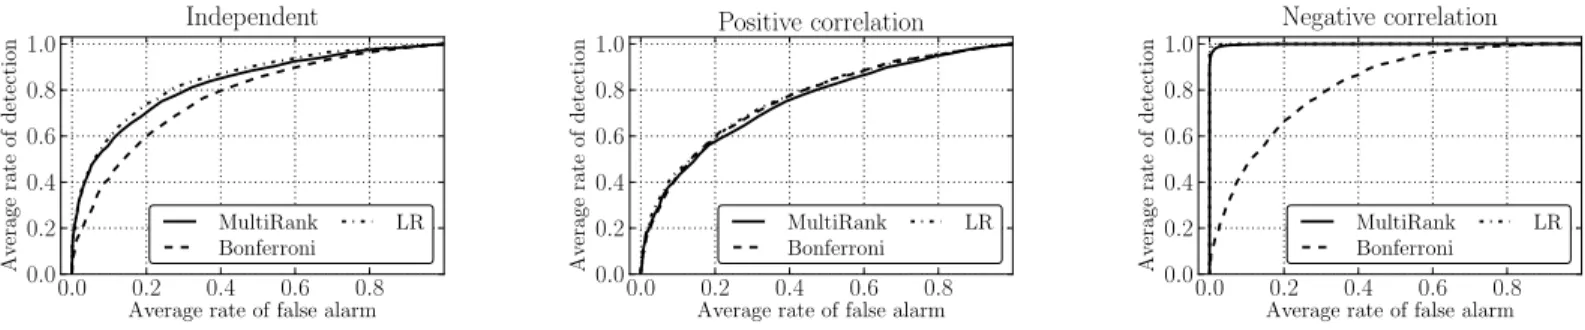 Figure 3: ROC curves for the MultiRank and the Bonferroni-type approaches when the coordinates are independent (left), positively correlated (middle) and negatively correlated (right)